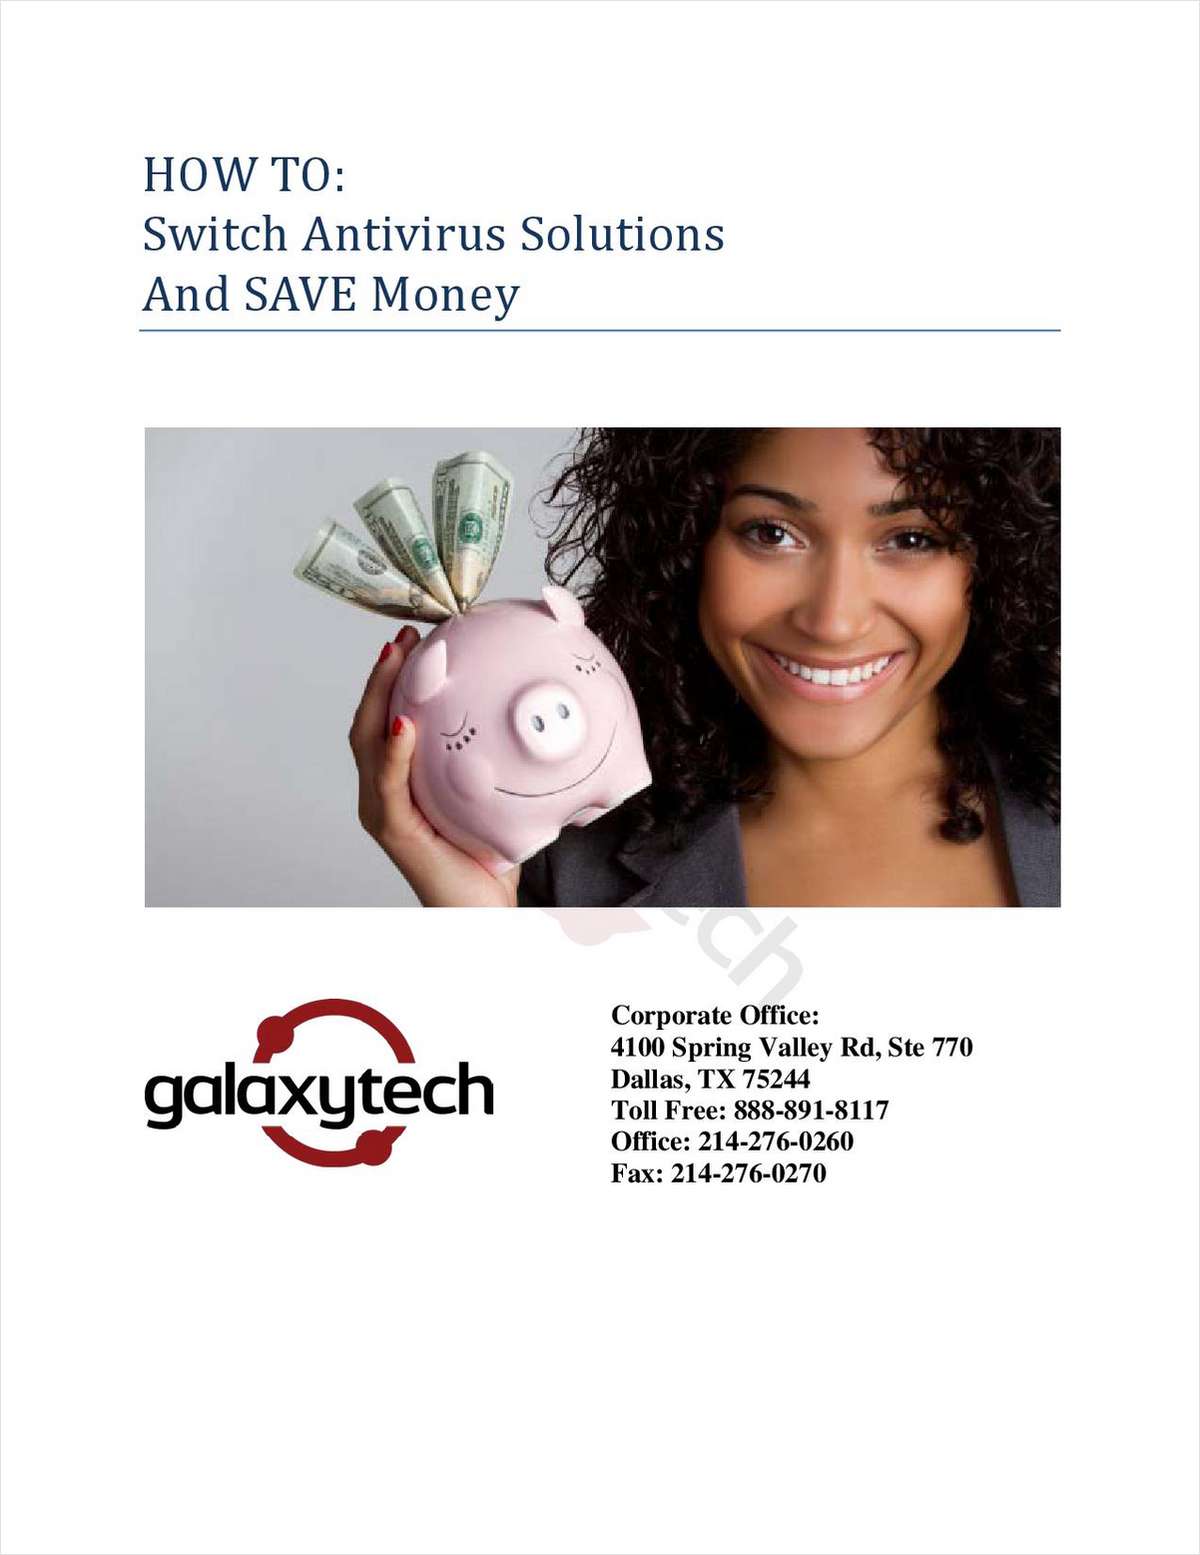 Learn How To Save Money by Switching Antivirus Solutions